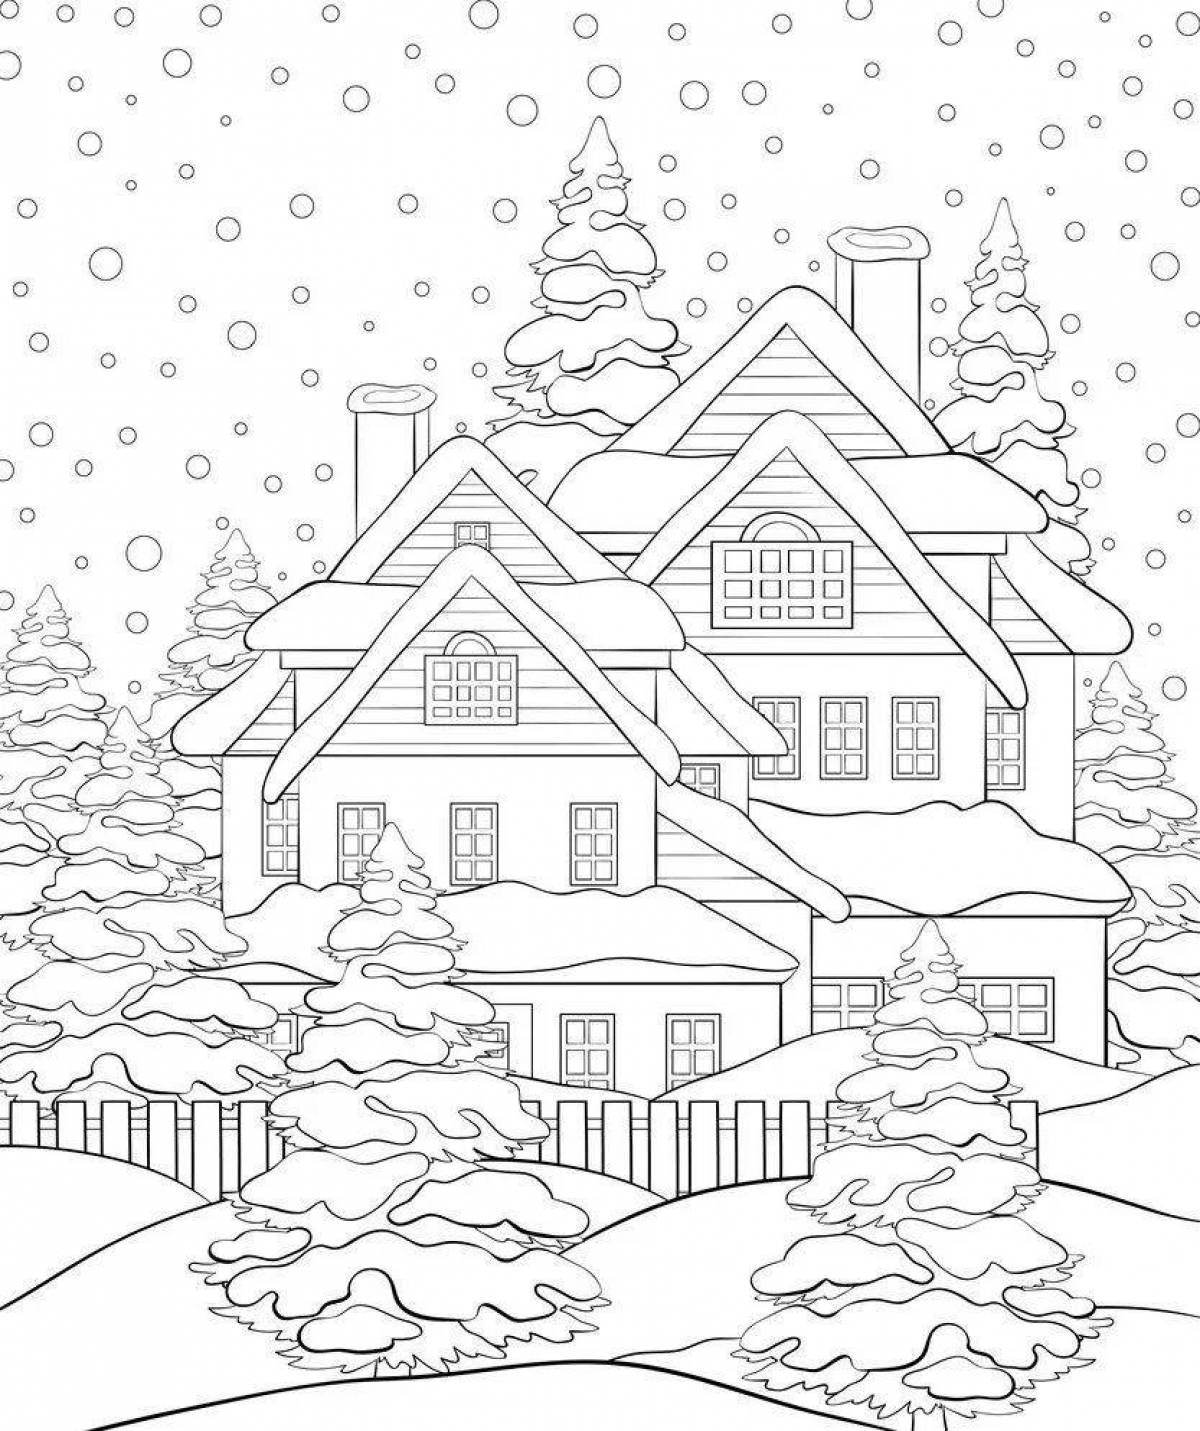 Calming winter night coloring page